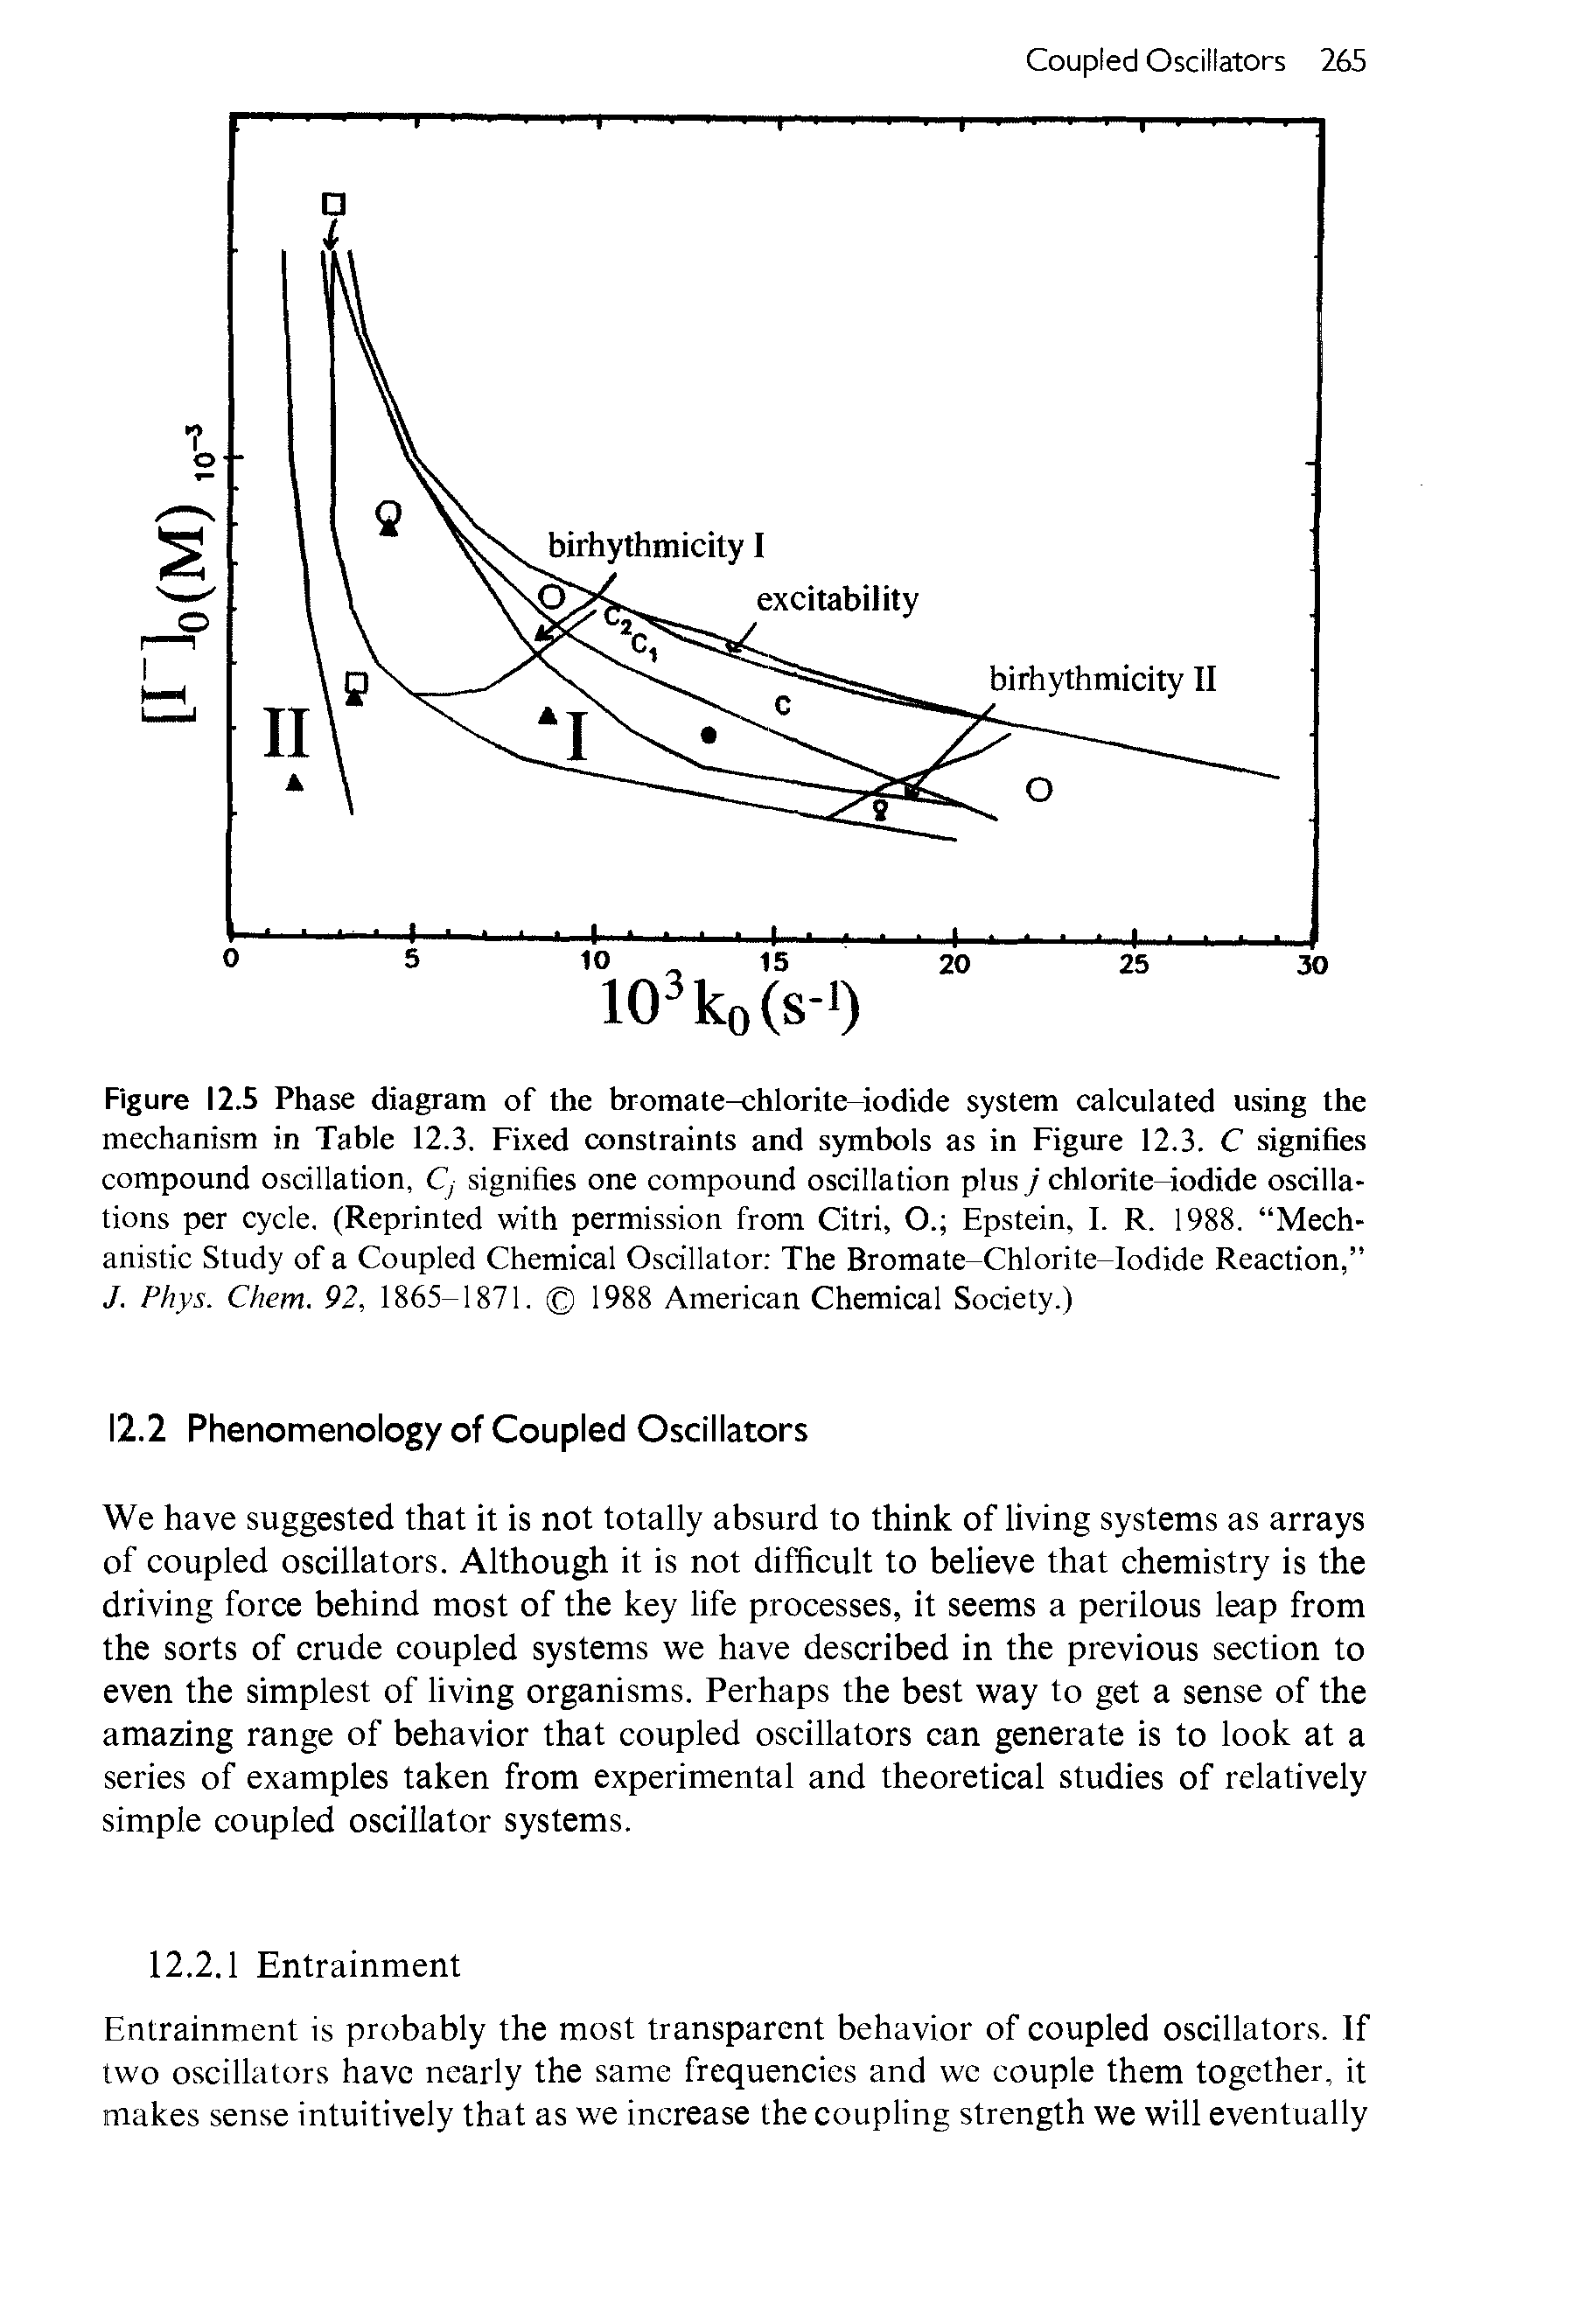 Figure 12.5 Phase diagram of the bromate-chlorite-iodide system calculated using the mechanism in Table 12.3. Fixed constraints and symbols as in Figure 12.3. C signifies compound oscillation, C, signifies one compound oscillation plus j chlorite-iodide oscillations per cycle, (Reprinted with permission from Citri, O. Epstein, I. R. 1988. Mechanistic Study of a Coupled Chemical Oscillator The Bromate-Chlorite-Iodide Reaction, J. Phys. Chem. 92, 1865-1871. 1988 American Chemical Society.)...